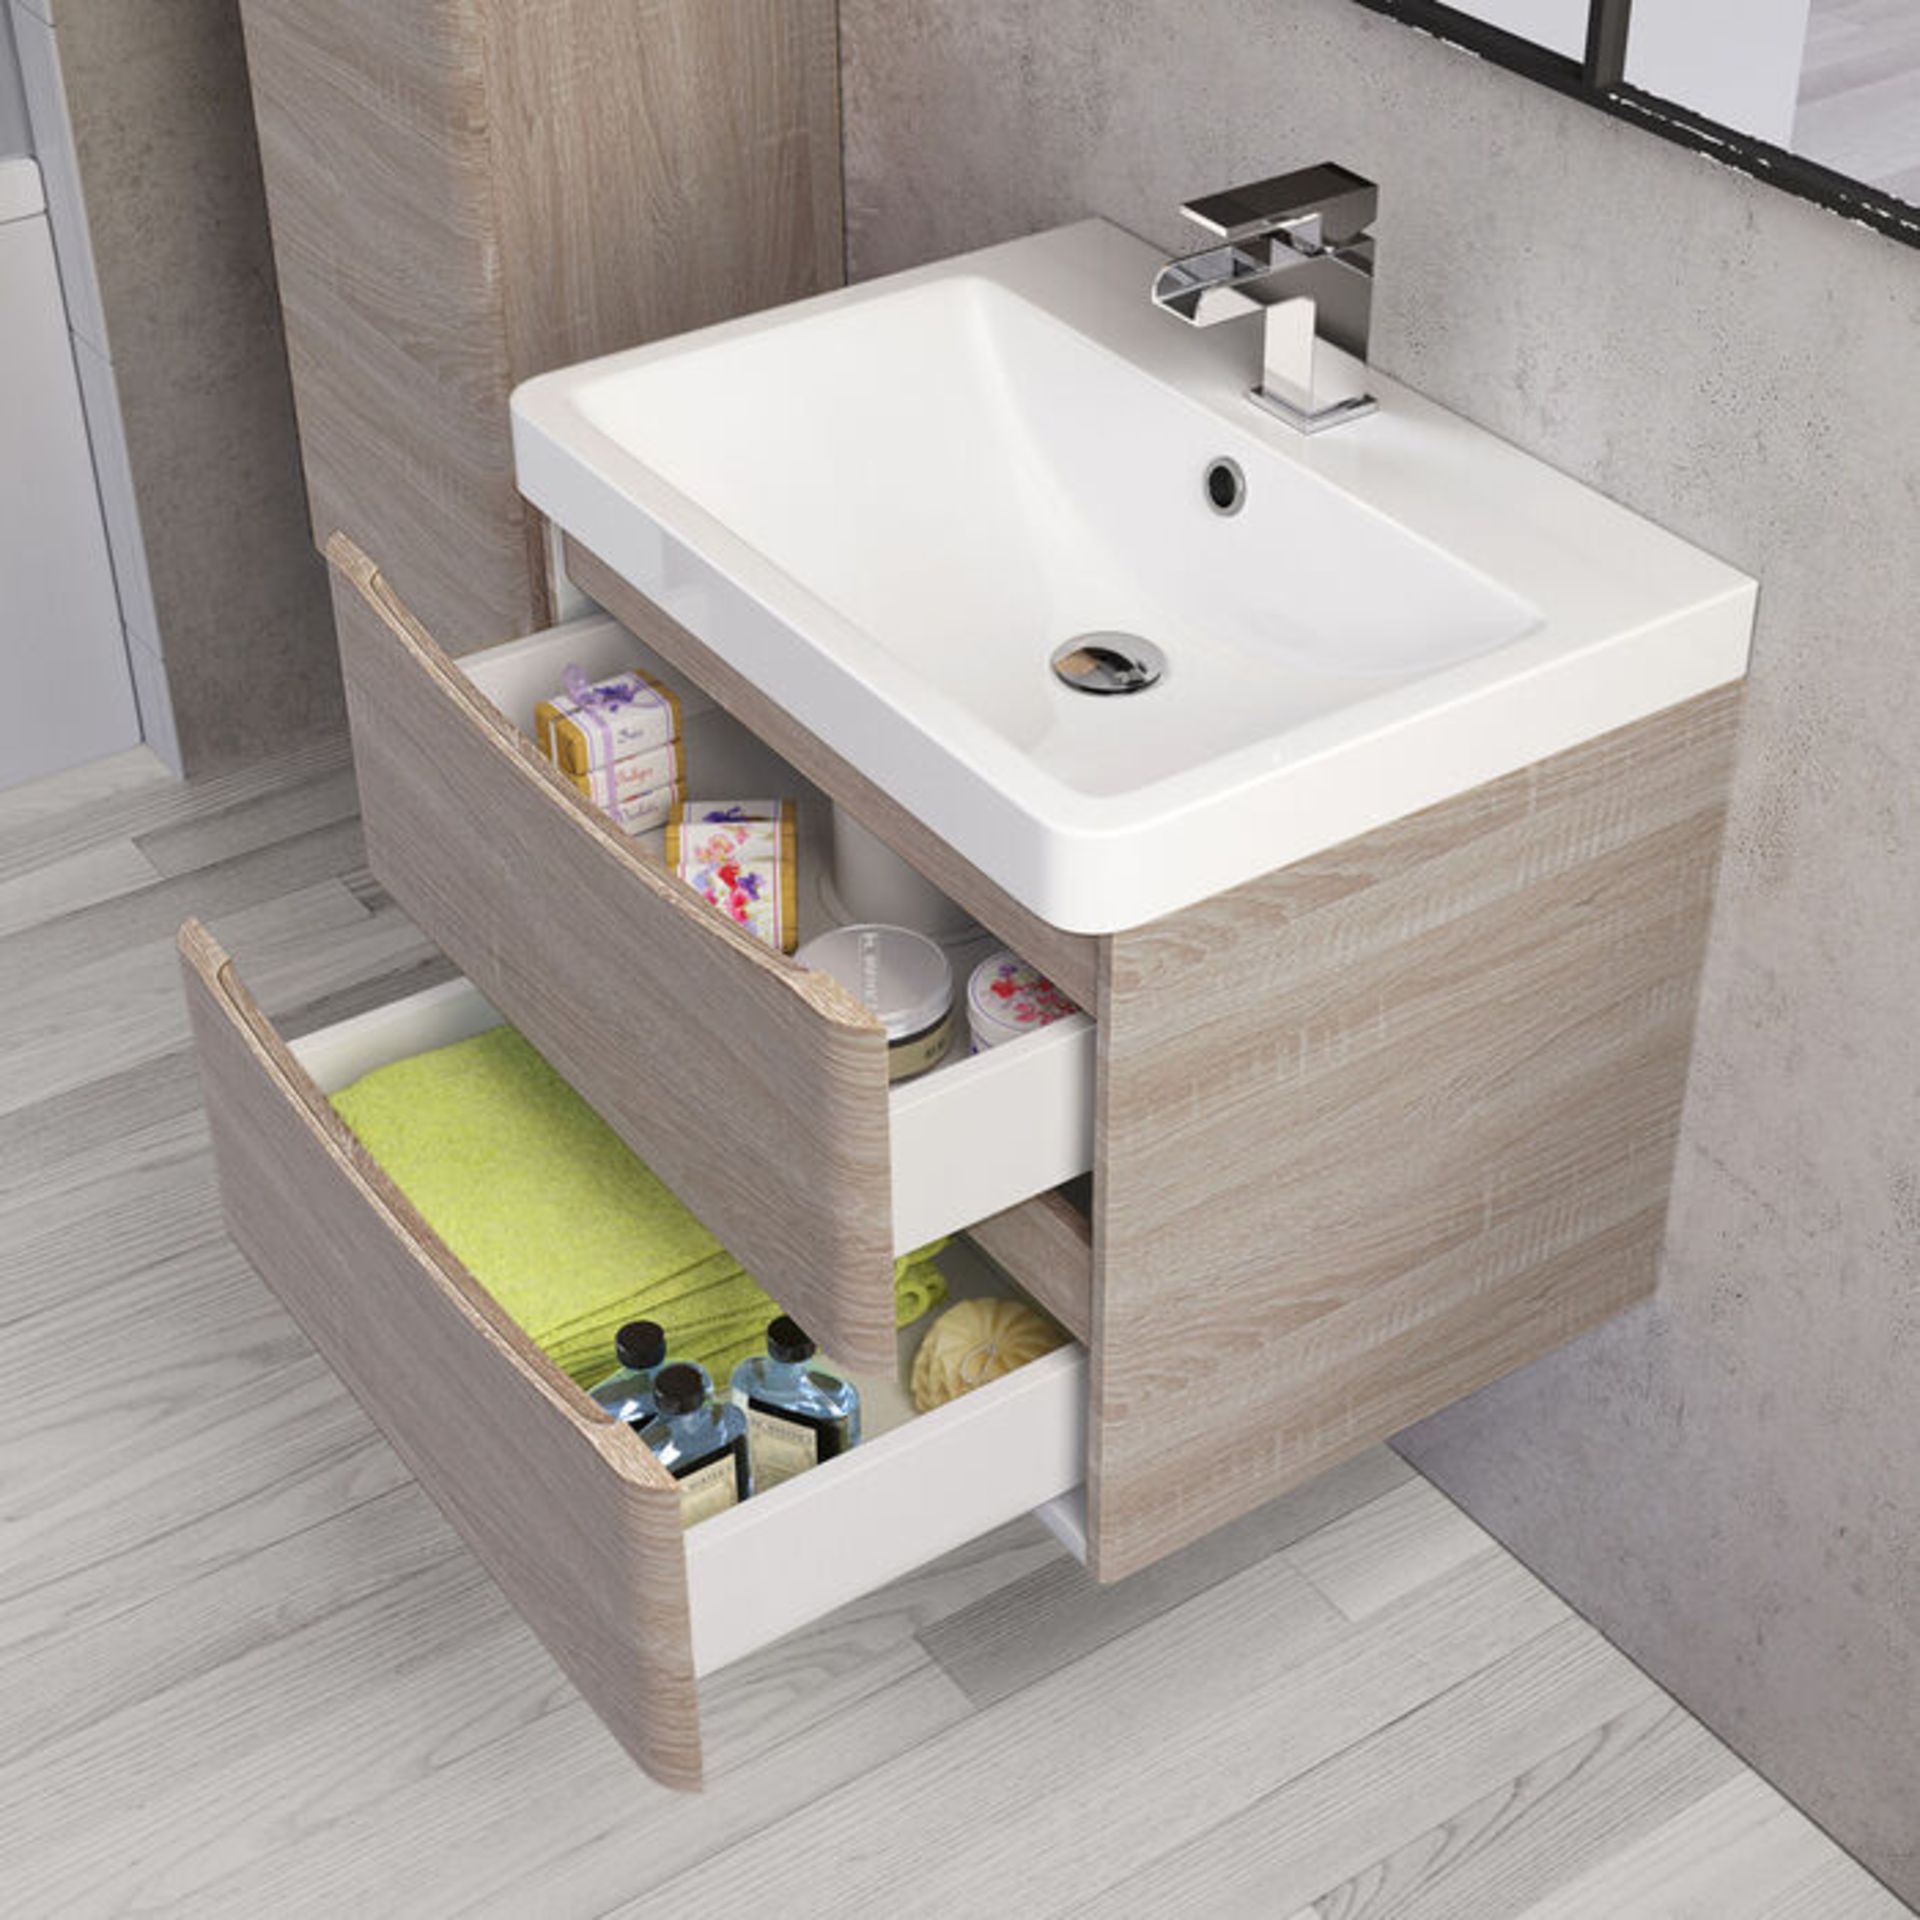 NEW & BOXED 600mm Austin II Light Oak Effect Built In Sink Drawer Unit - Wall Hung. RRP £849... - Image 2 of 2